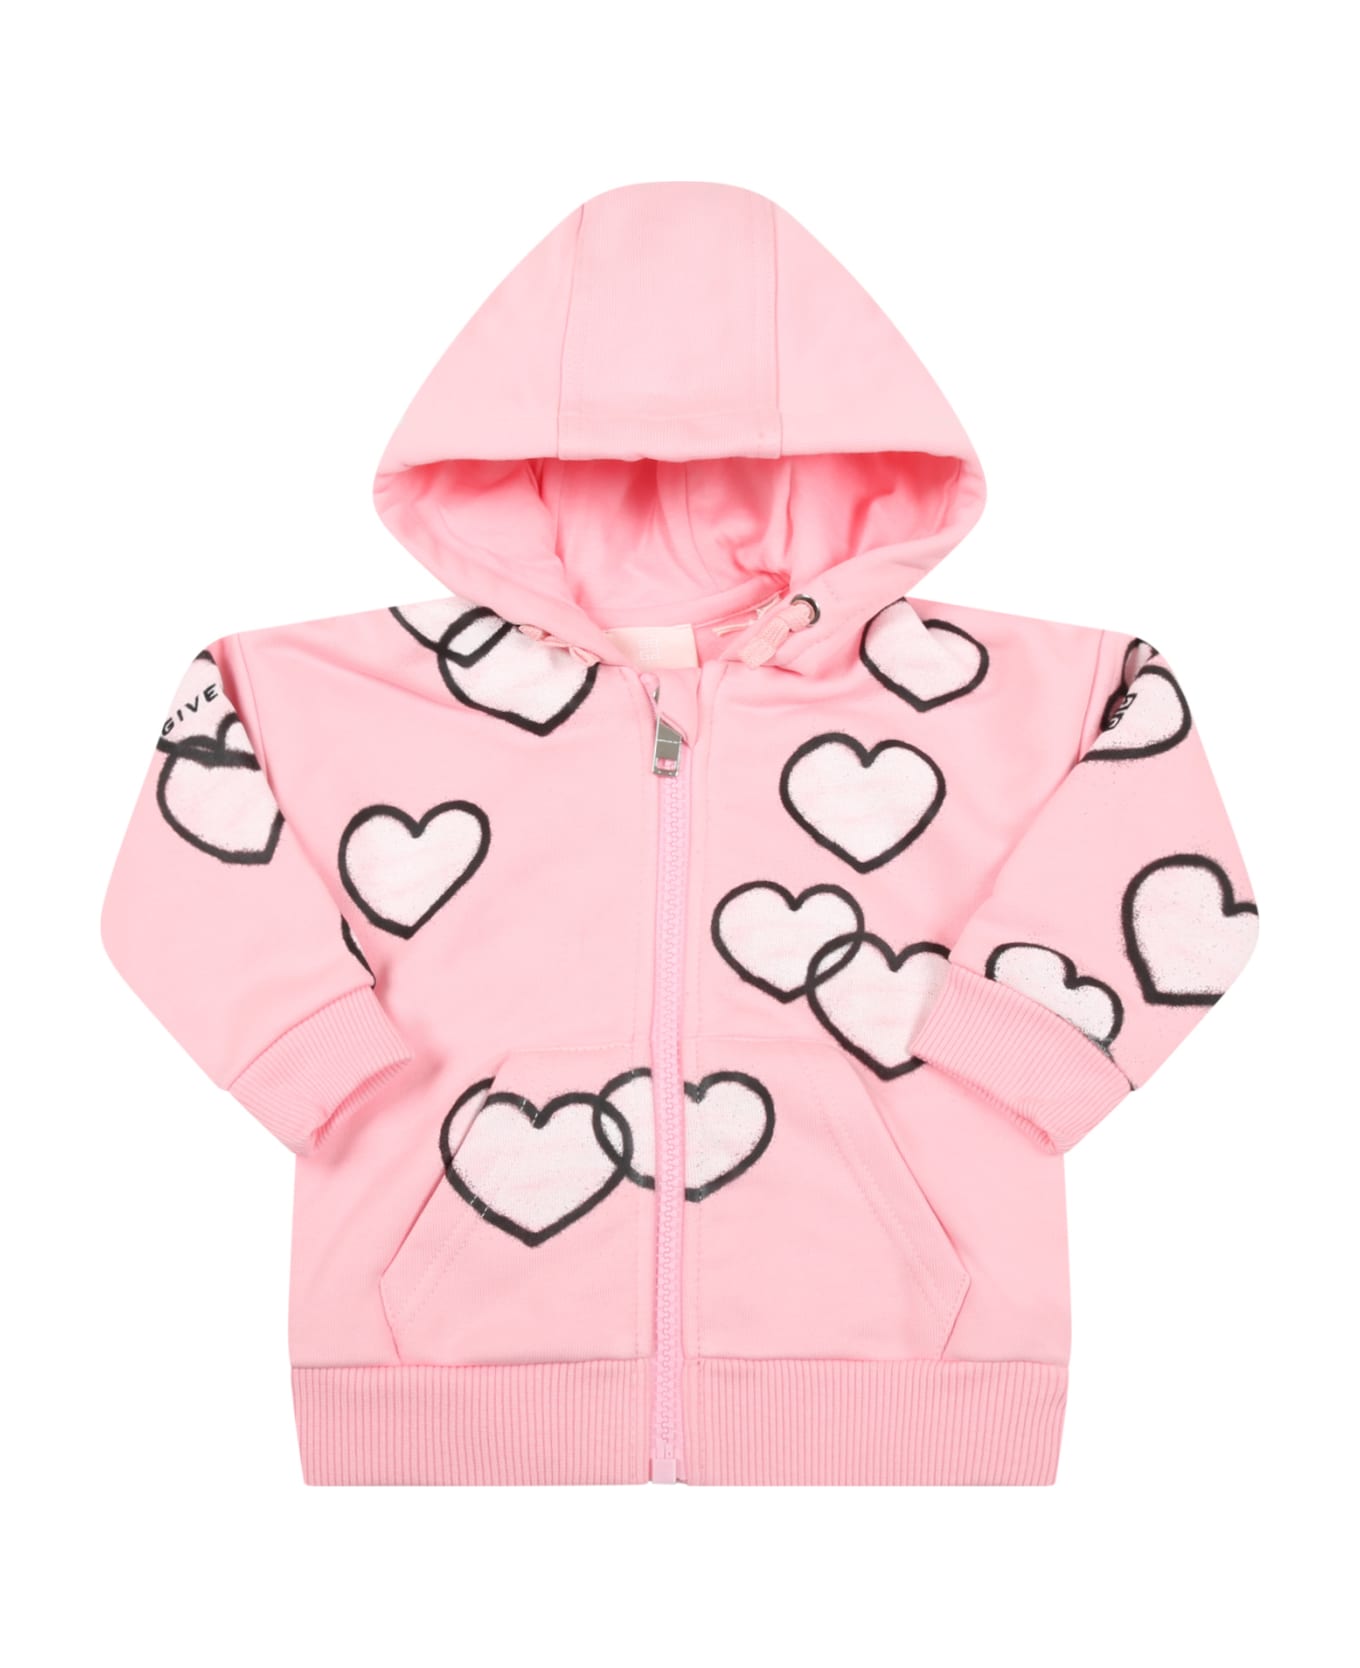 Givenchy Pink Sweatshirt For Baby Girl With Hearts - Pink